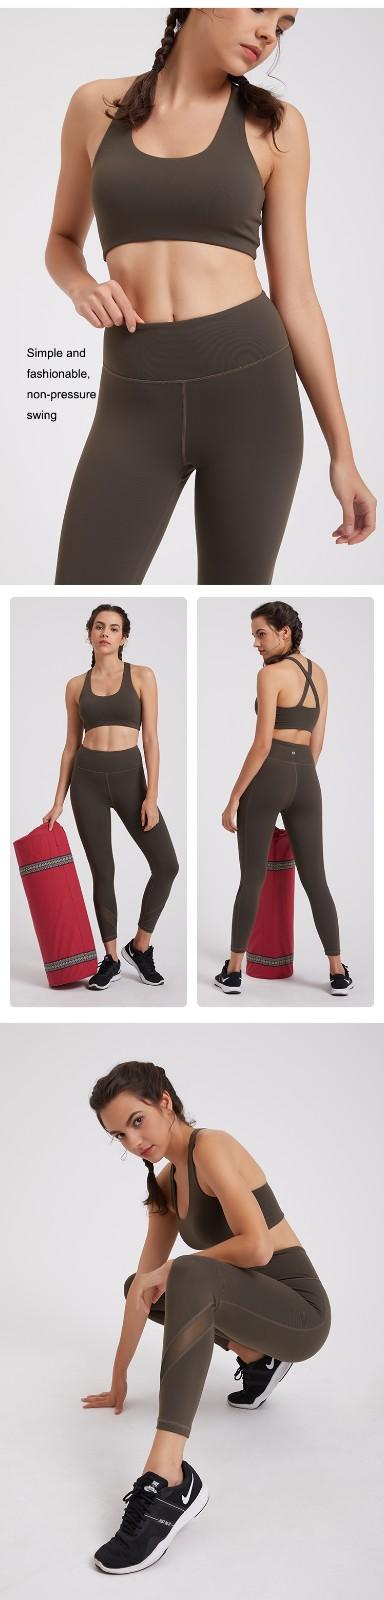 online hot yoga pants outfits factory price for women